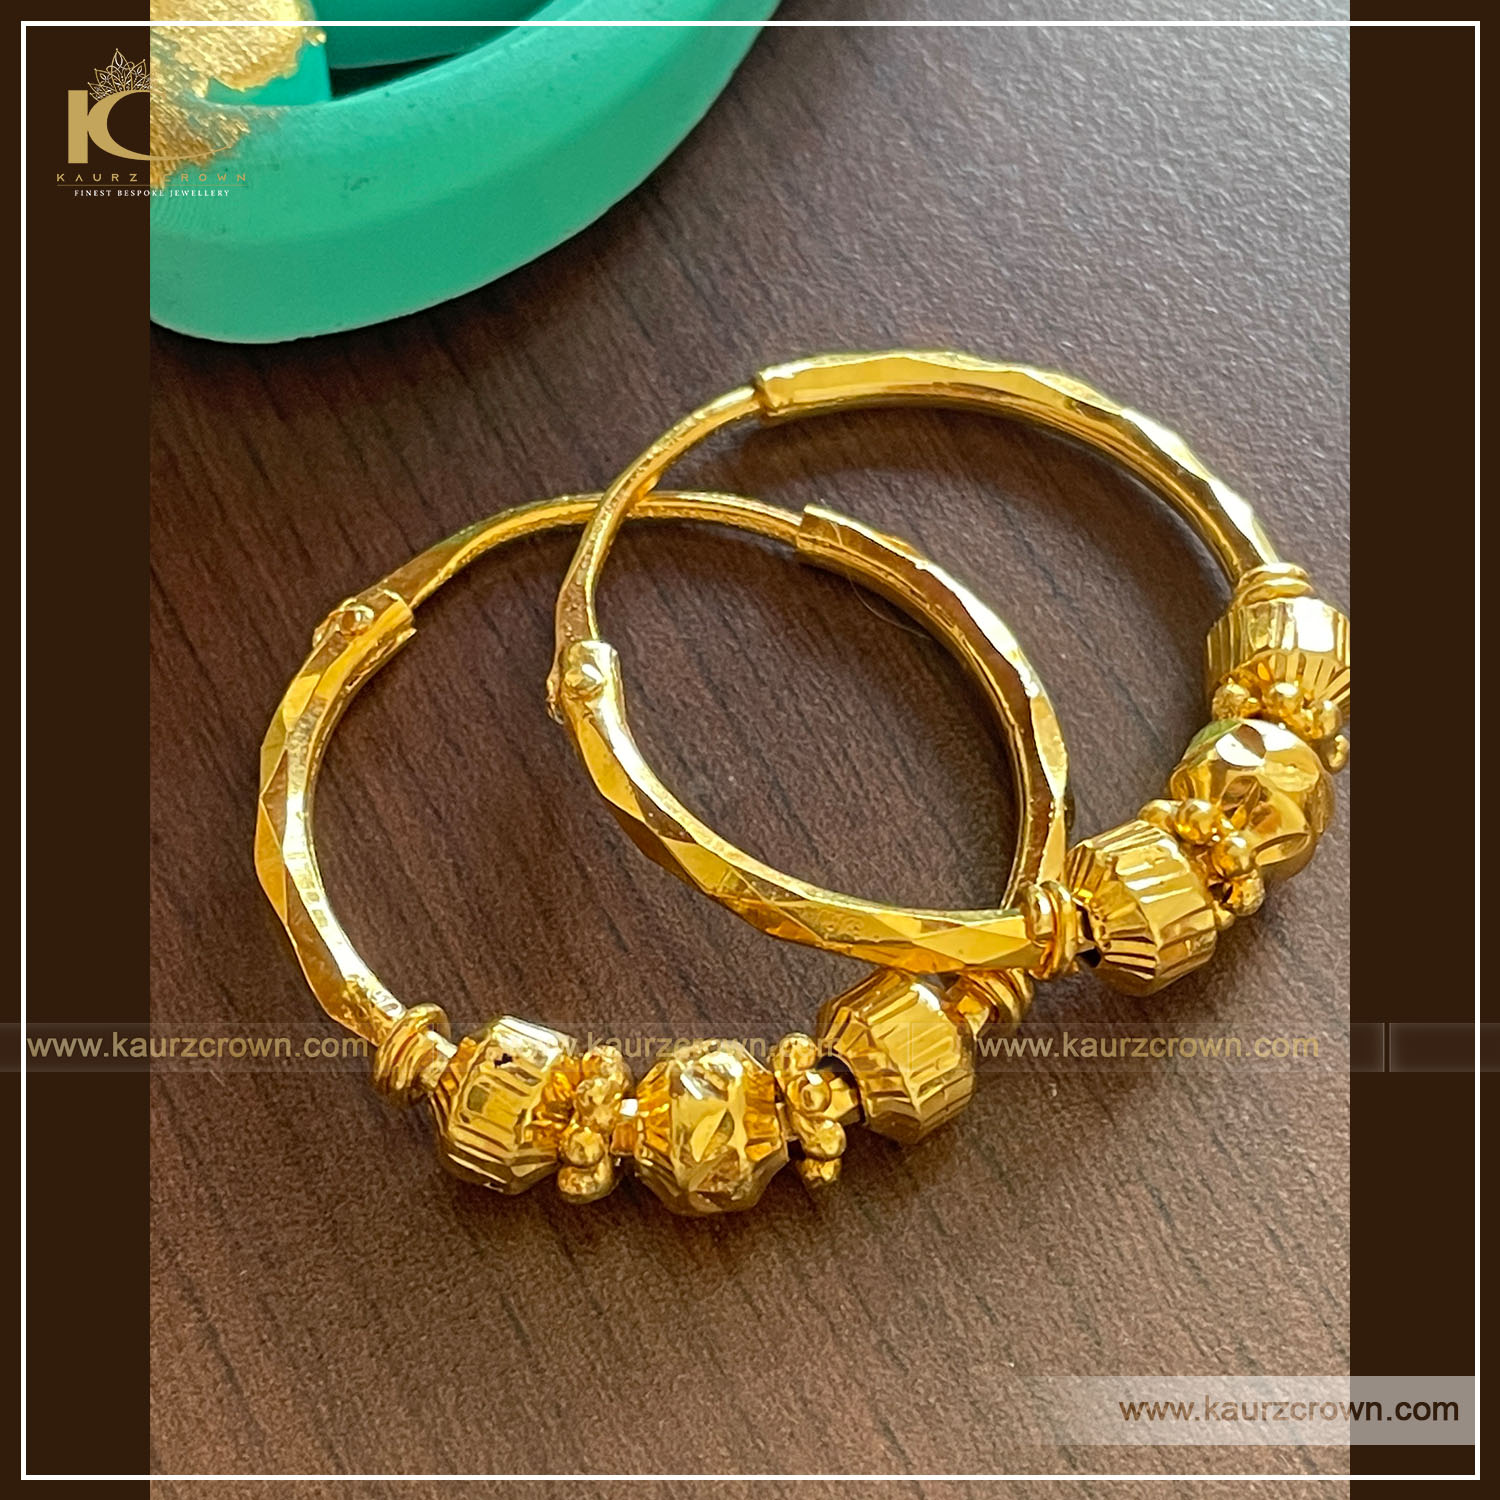 Aatifa Traditional Antique Gold Plated Earring , kaurz crown jewellery online jewellery store